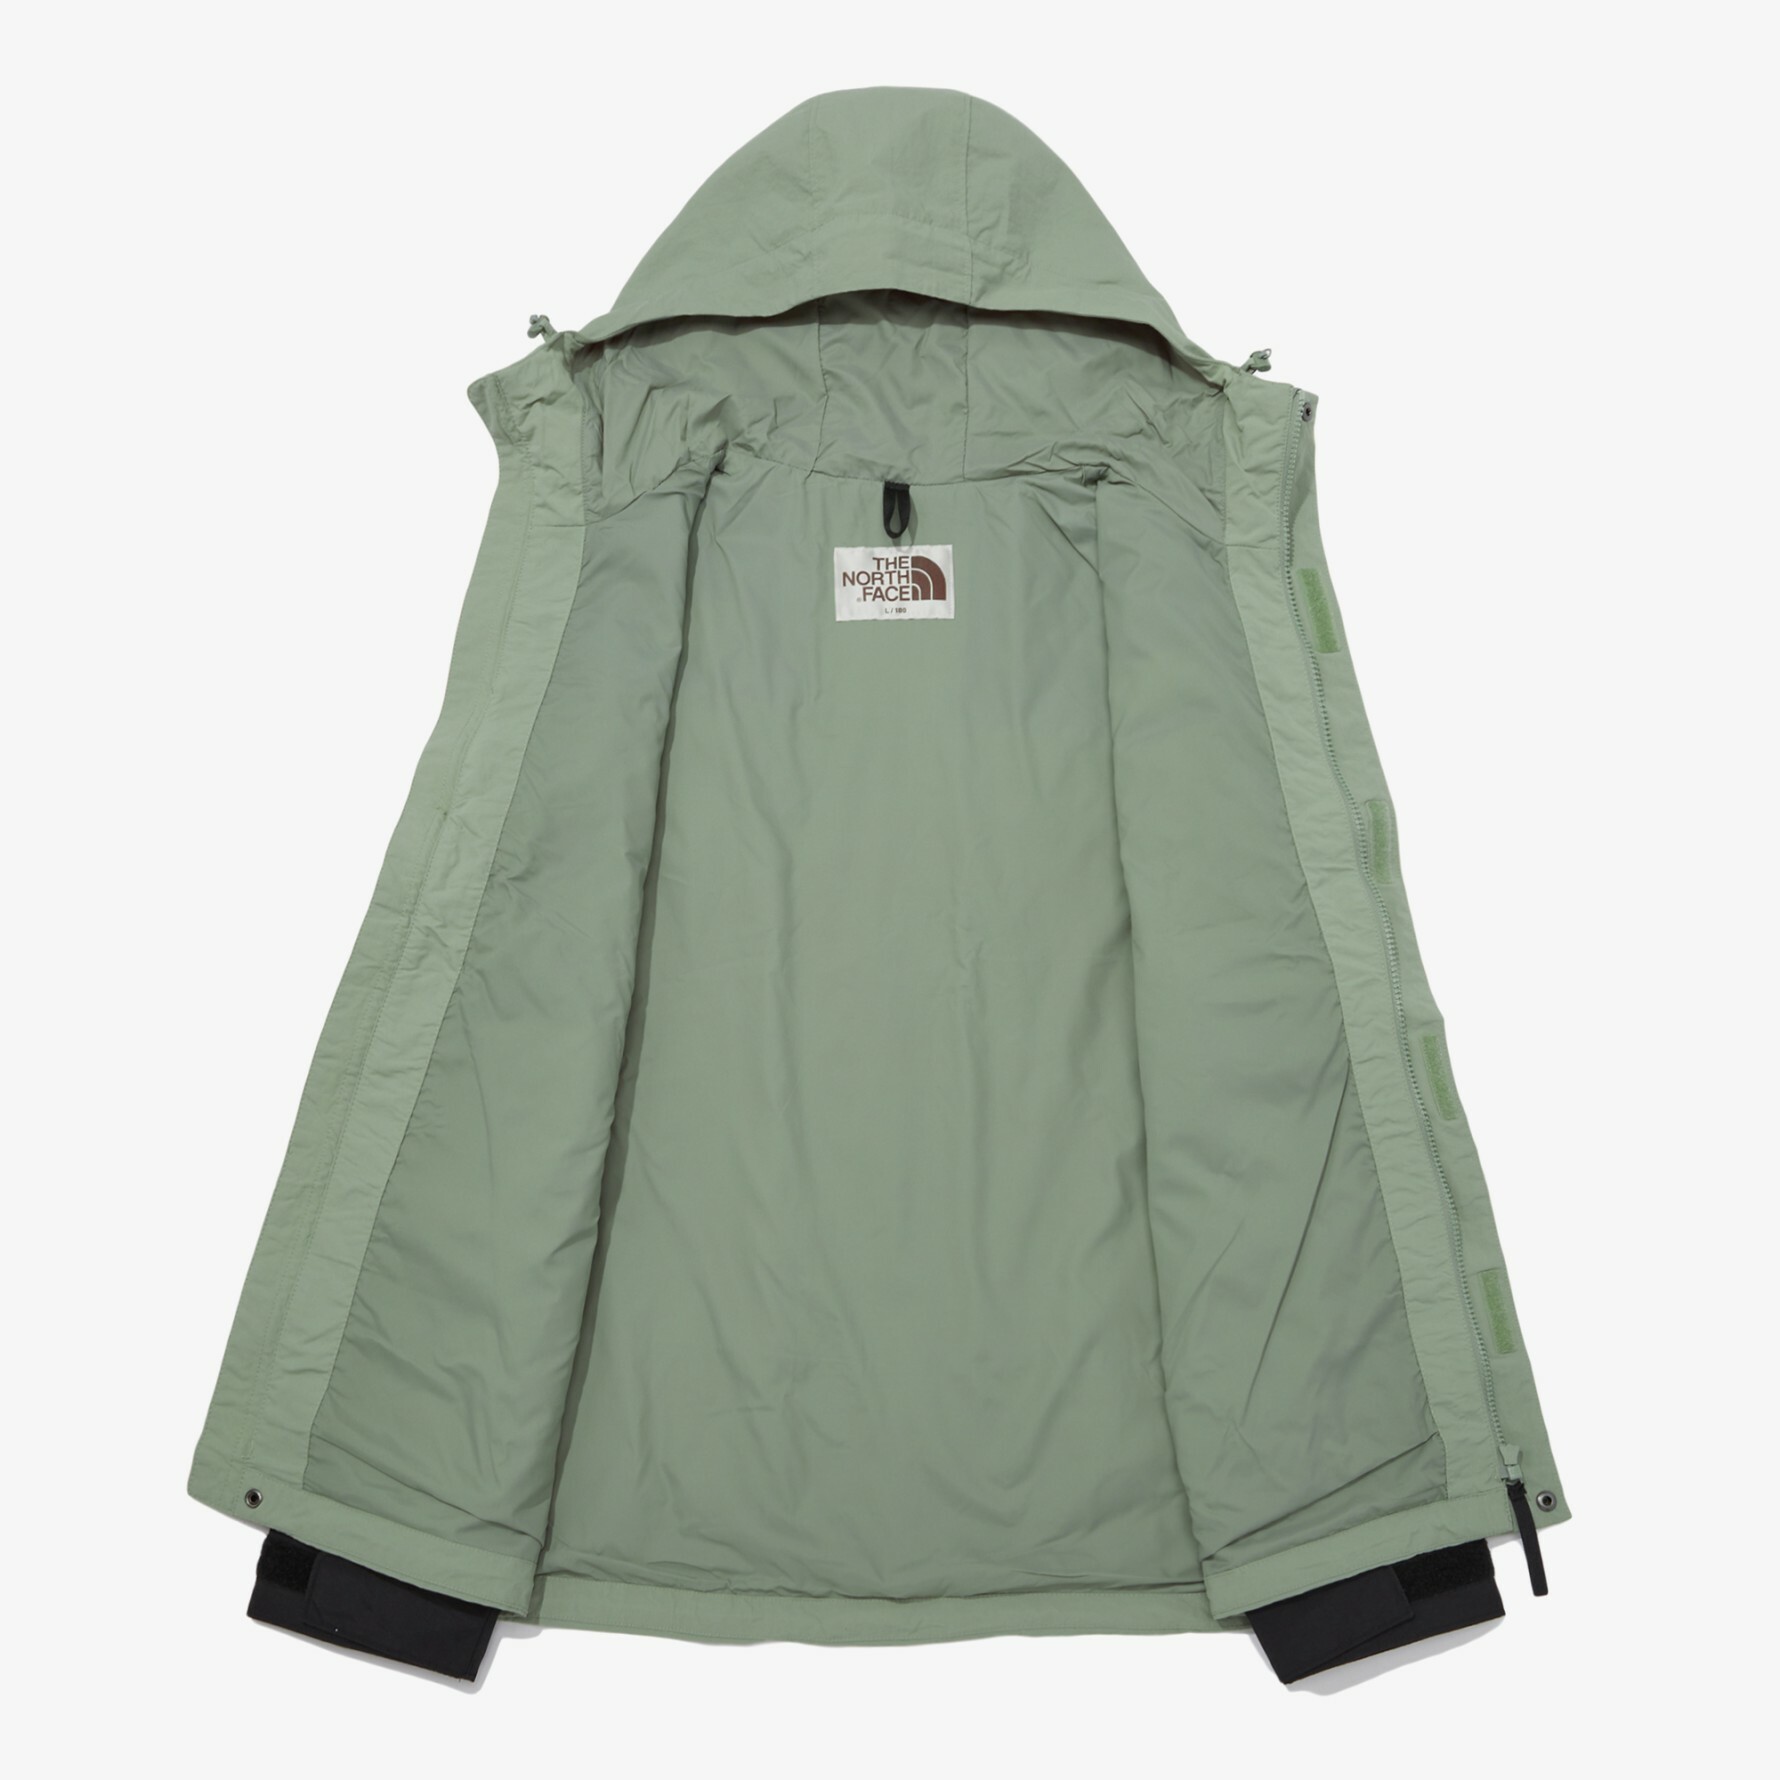 THE NORTH FACE MARTIS JACKET